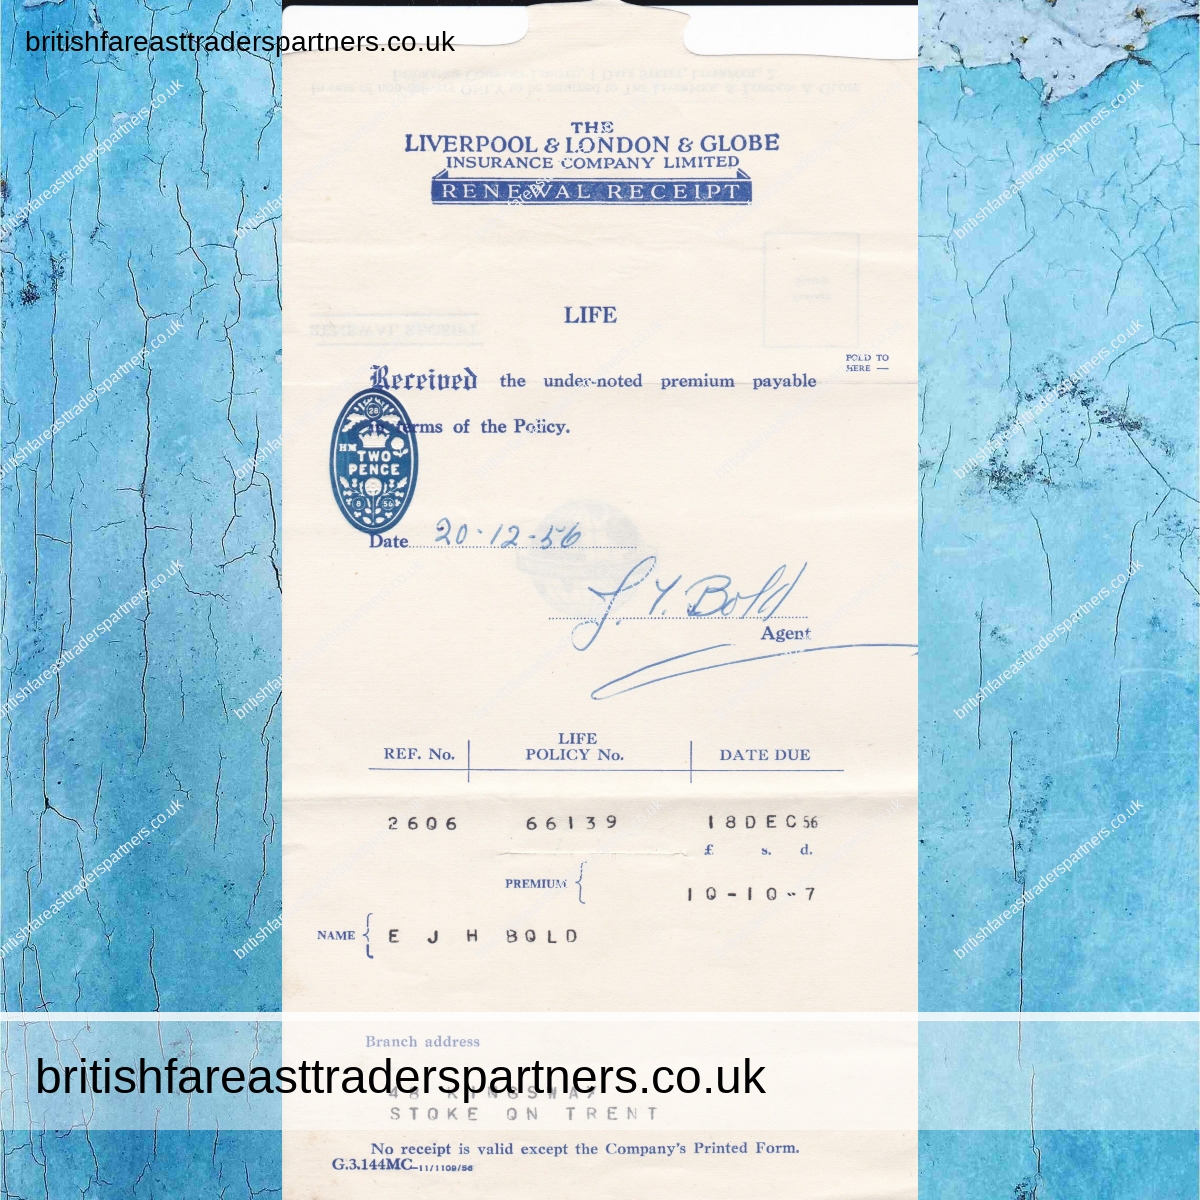 VINTAGE 1956 RENEWAL RECEIPT THE LIVERPOOL &LONDON & GLOBE INSURANCE COMPANY LIMITED COLLECTABLES | PAPER & EPHEMERA BUSINESS | COMPANIES | INDUSTRIES | ENGLAND / ENGLISH | UNITED KINGDOM | BRITISH HERITAGE | HISTORY | LIFESTYLE & CULTURE